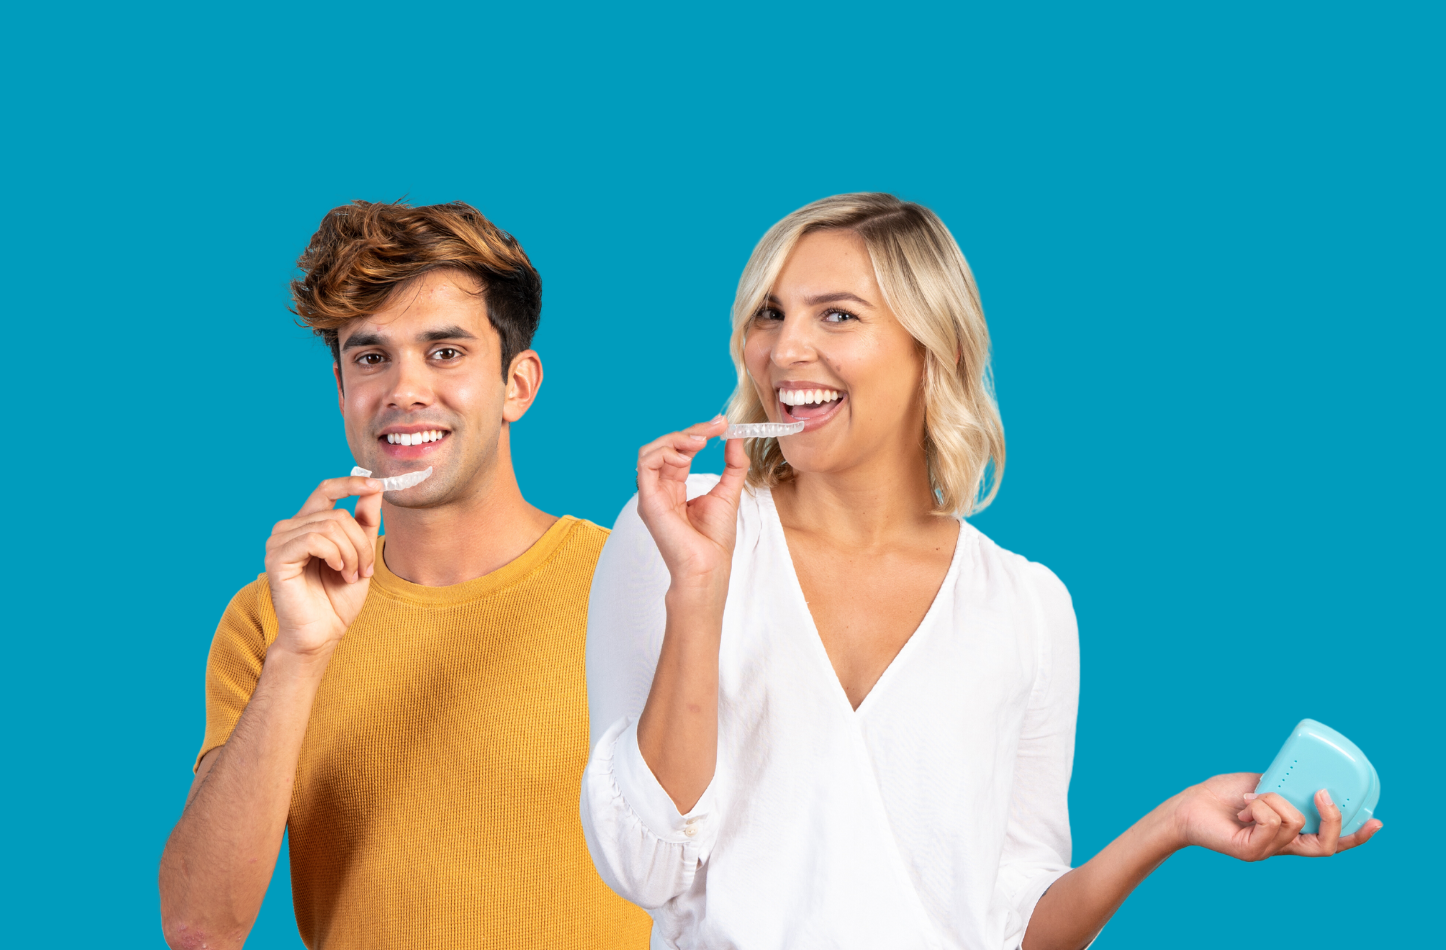 Two people brushing their teeth and smiling against a blue background.